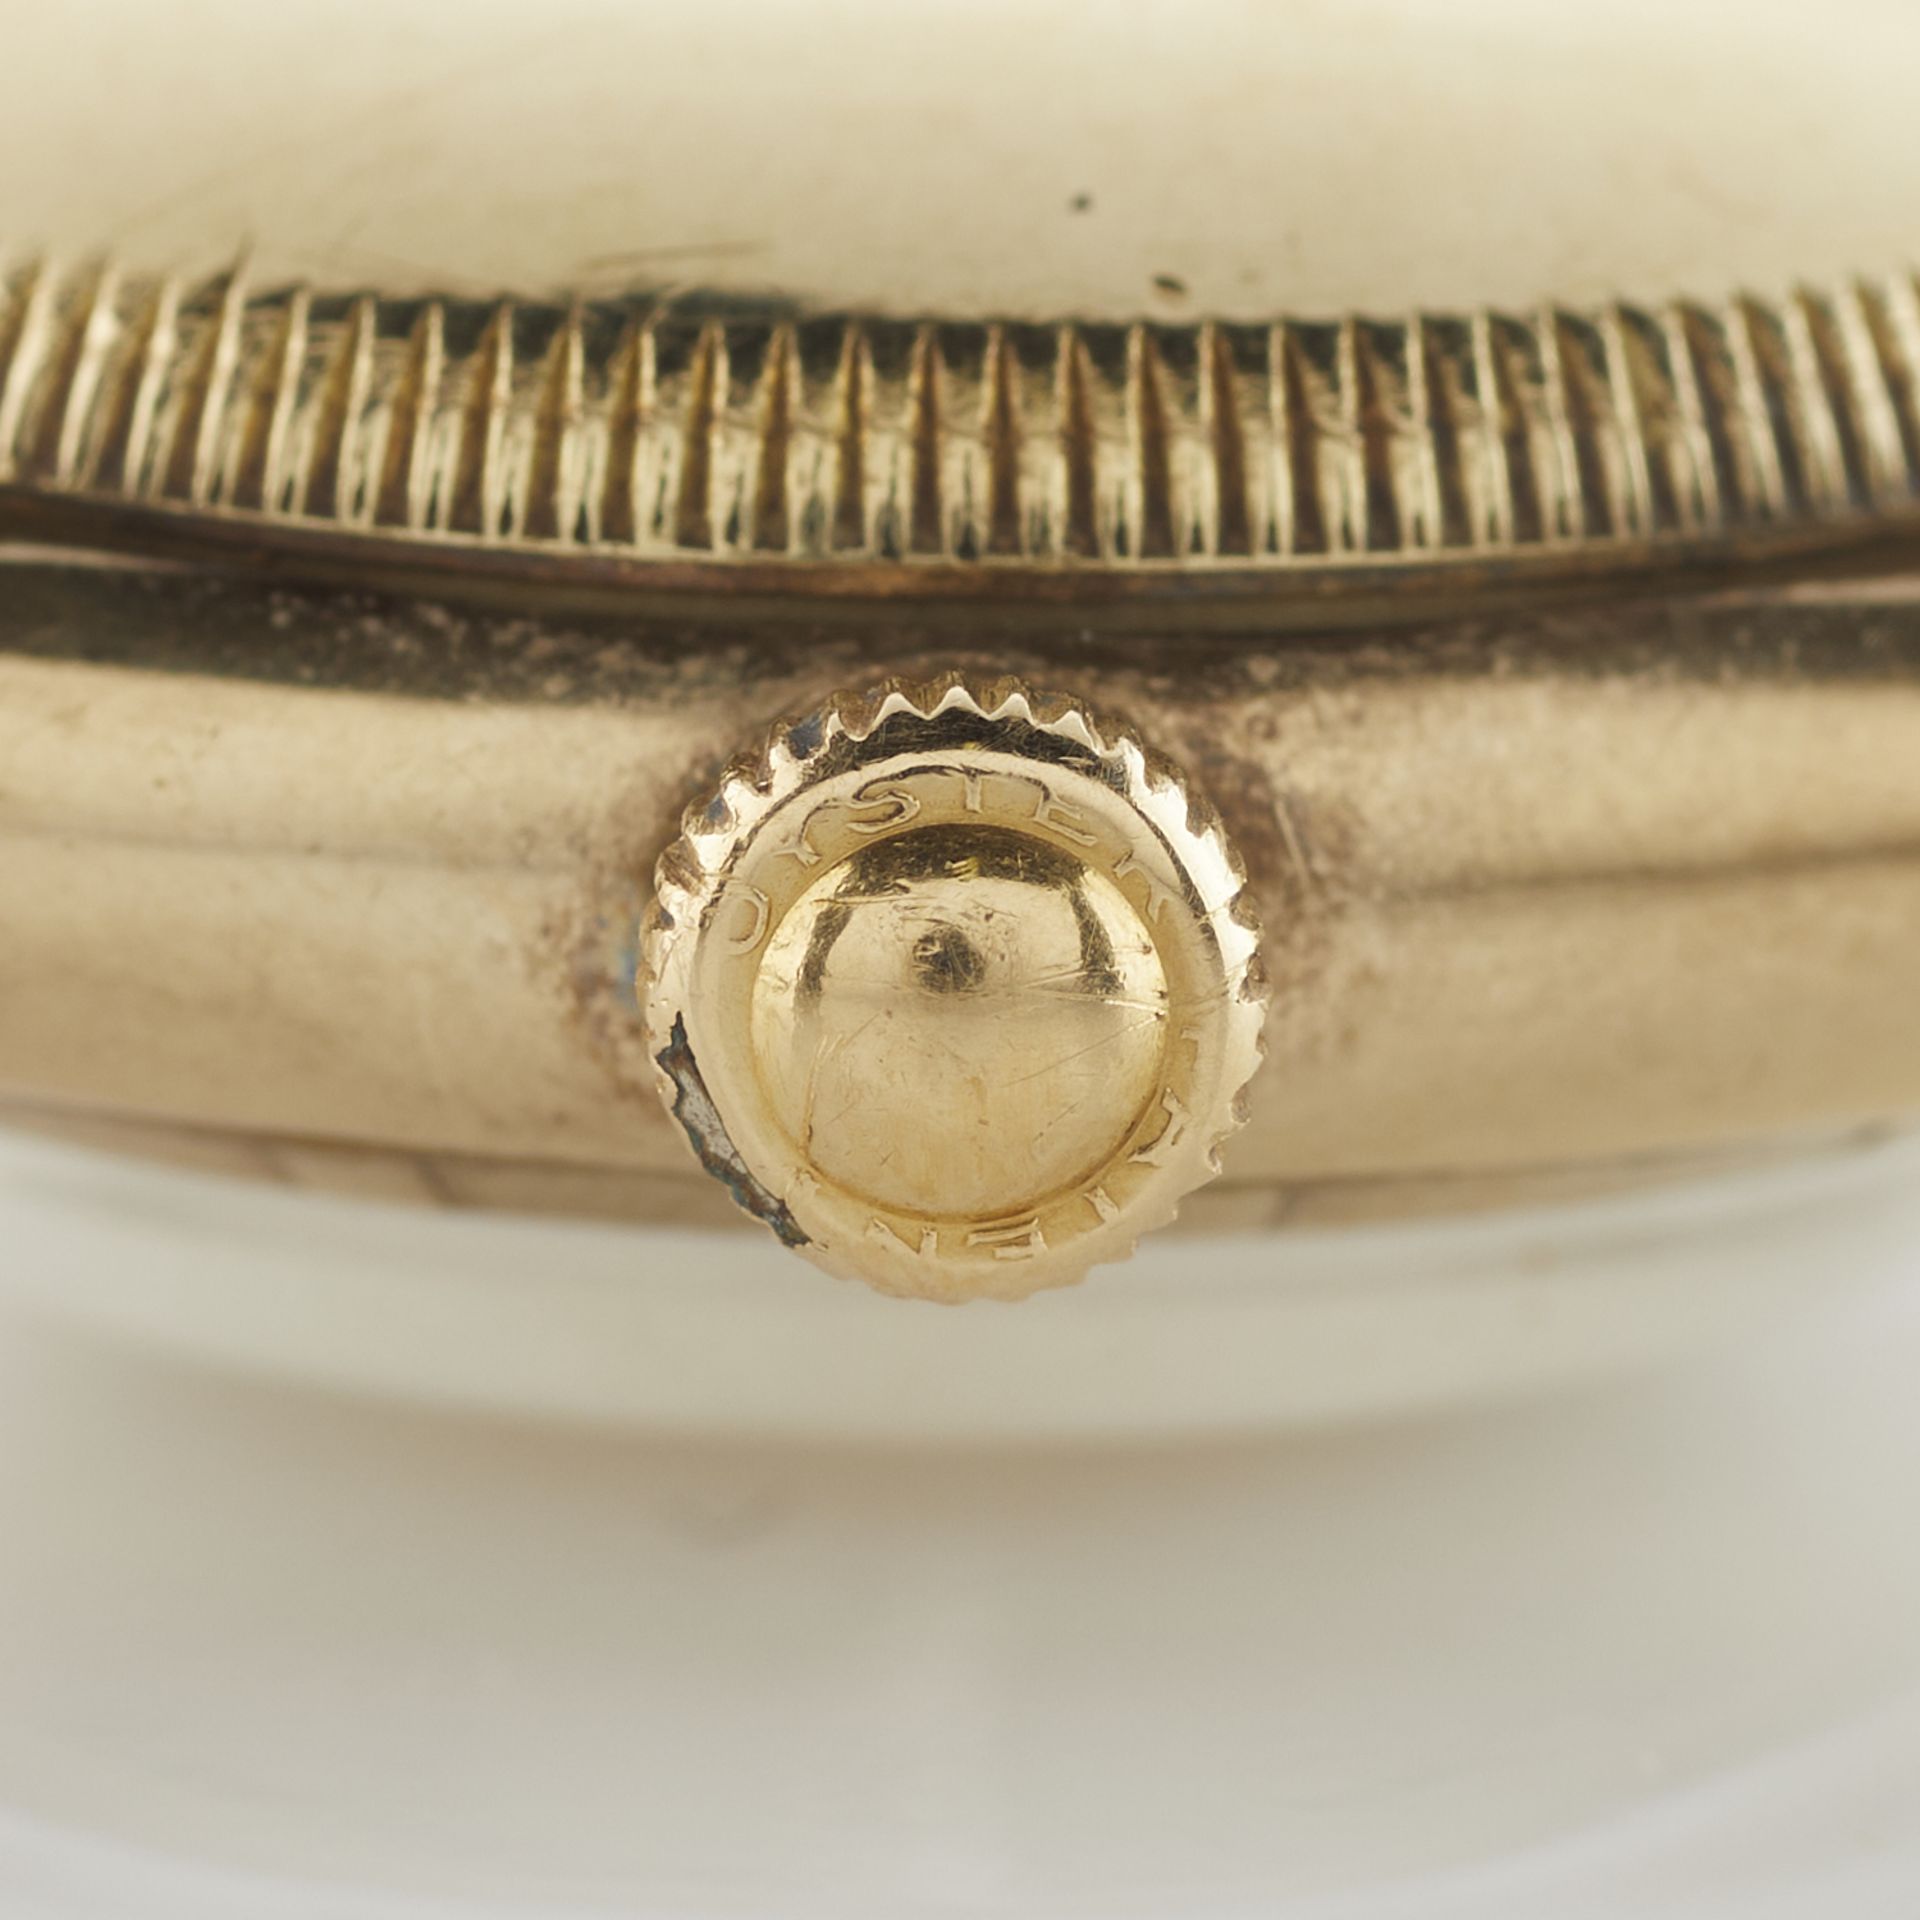 14k Rolex Oyster Perpetual 4777 Bubble Back - Image 9 of 14